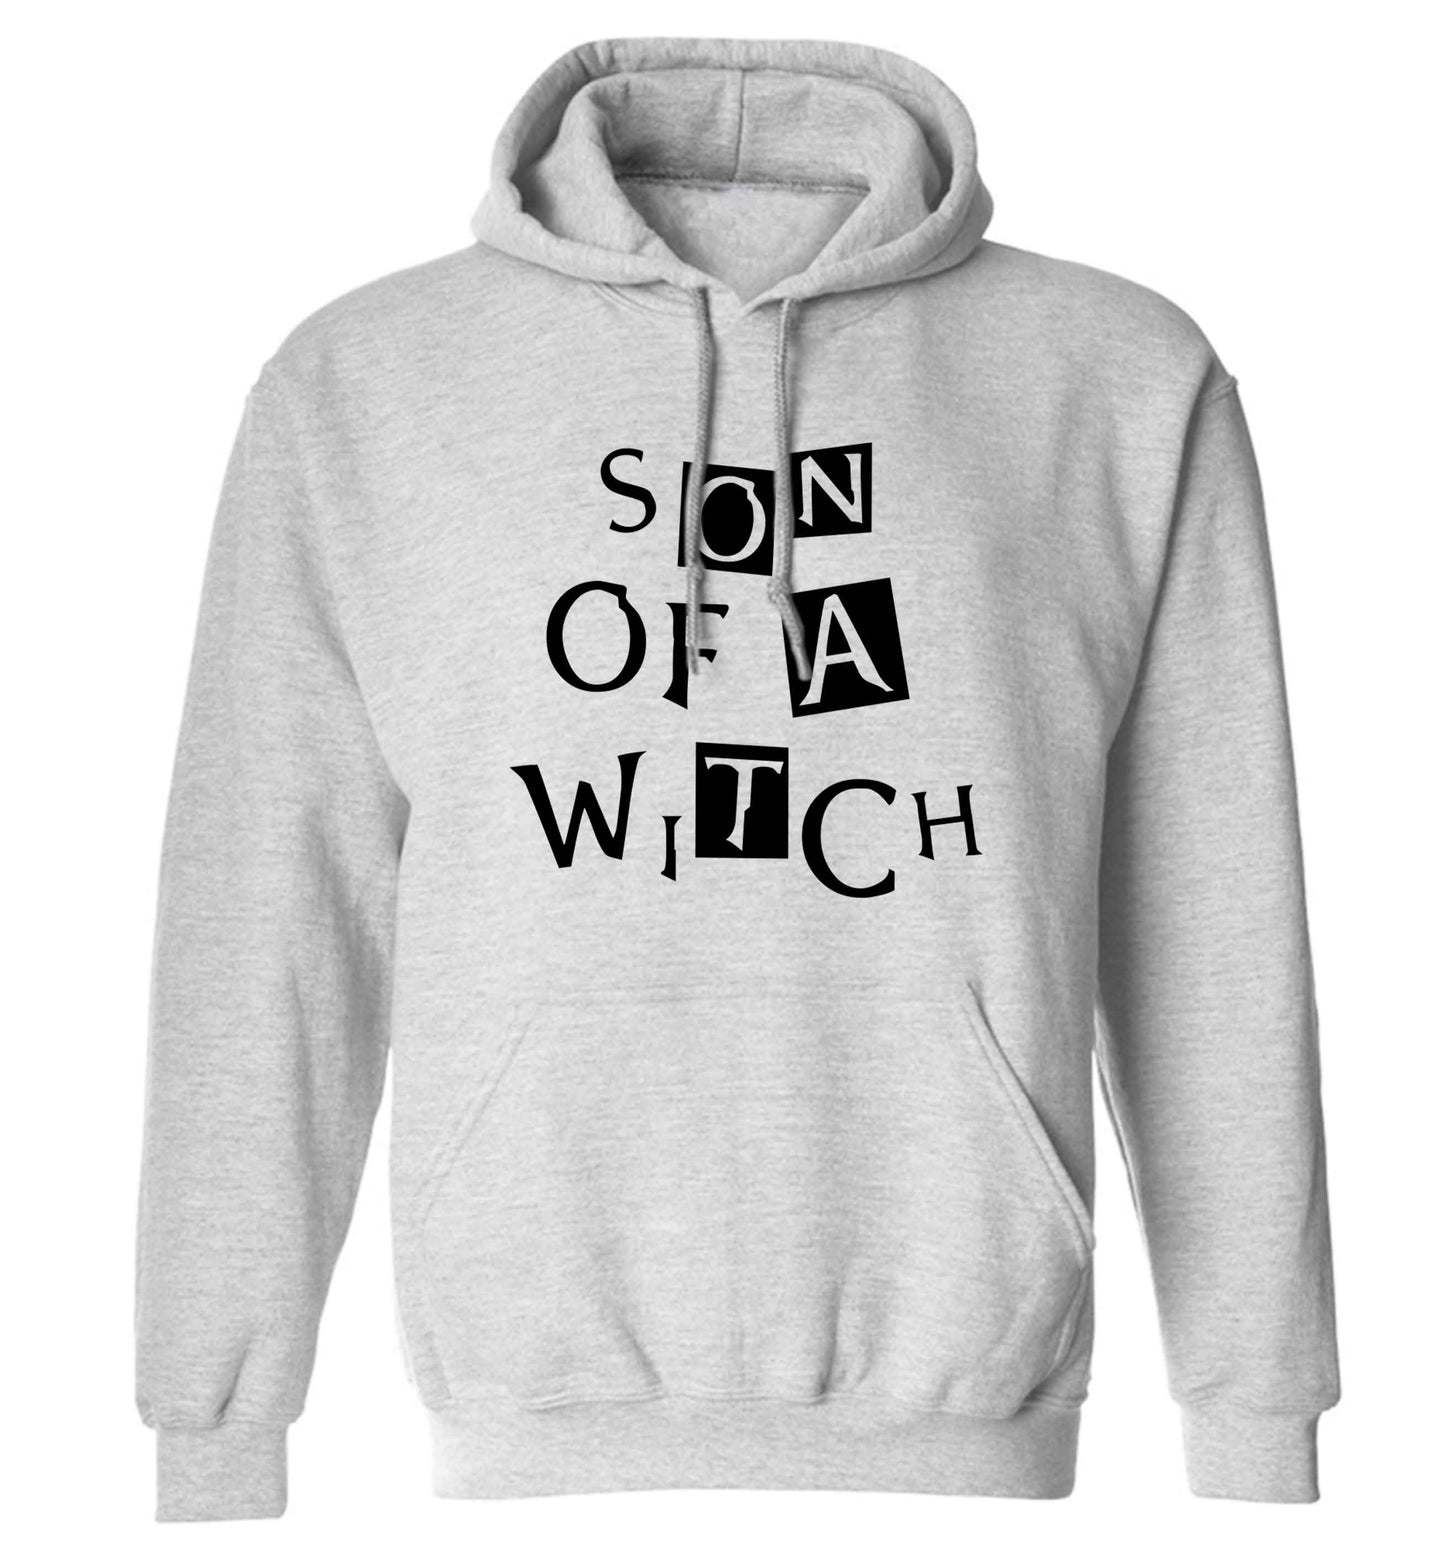 Son of a witch adults unisex grey hoodie 2XL